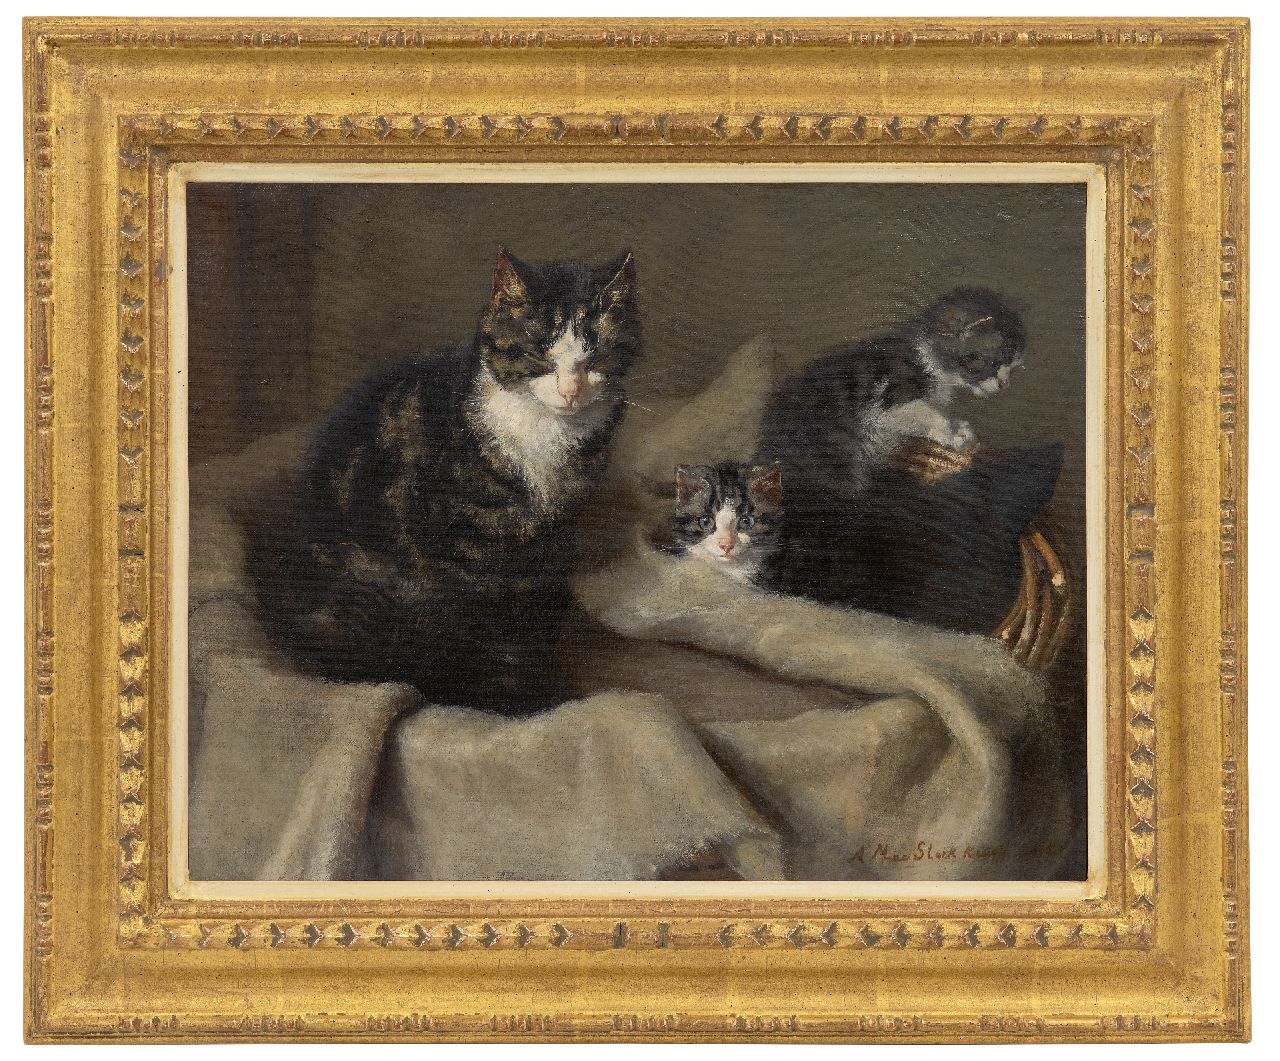 Kruijff A.M.  | Anna Maria Kruijff, Mother cat with two kittens, oil on canvas 35.2 x 45.4 cm, signed l.r. and dated 1908